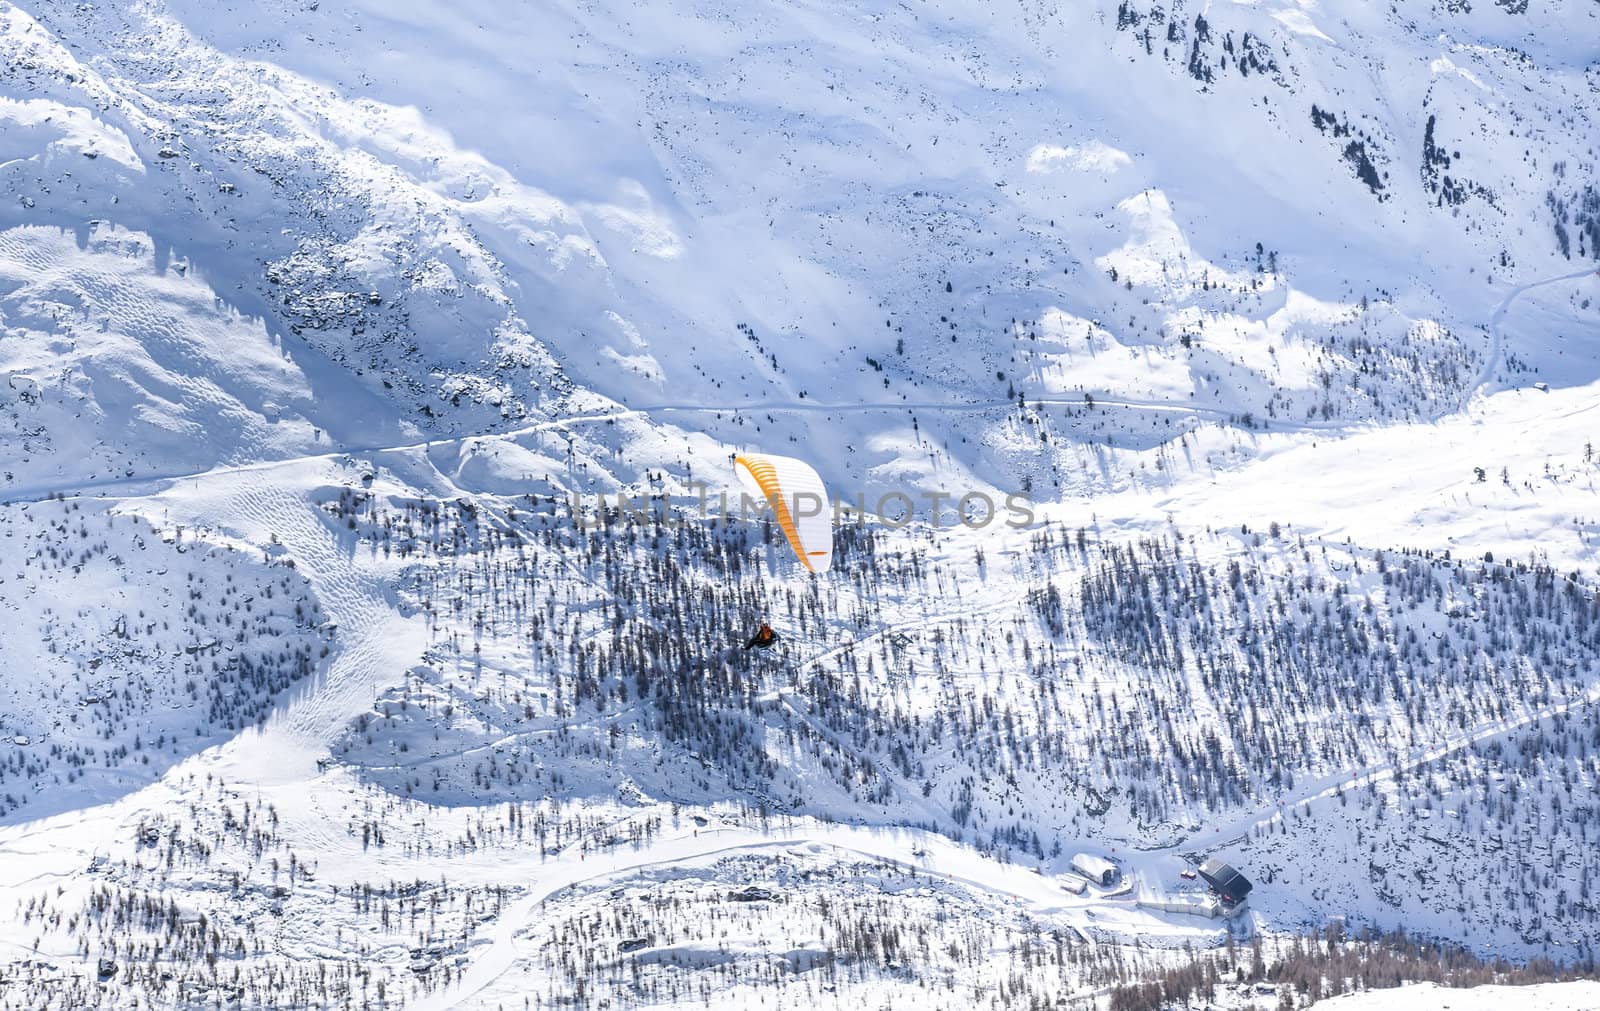 Alps snow hills with orange parachute by RawGroup